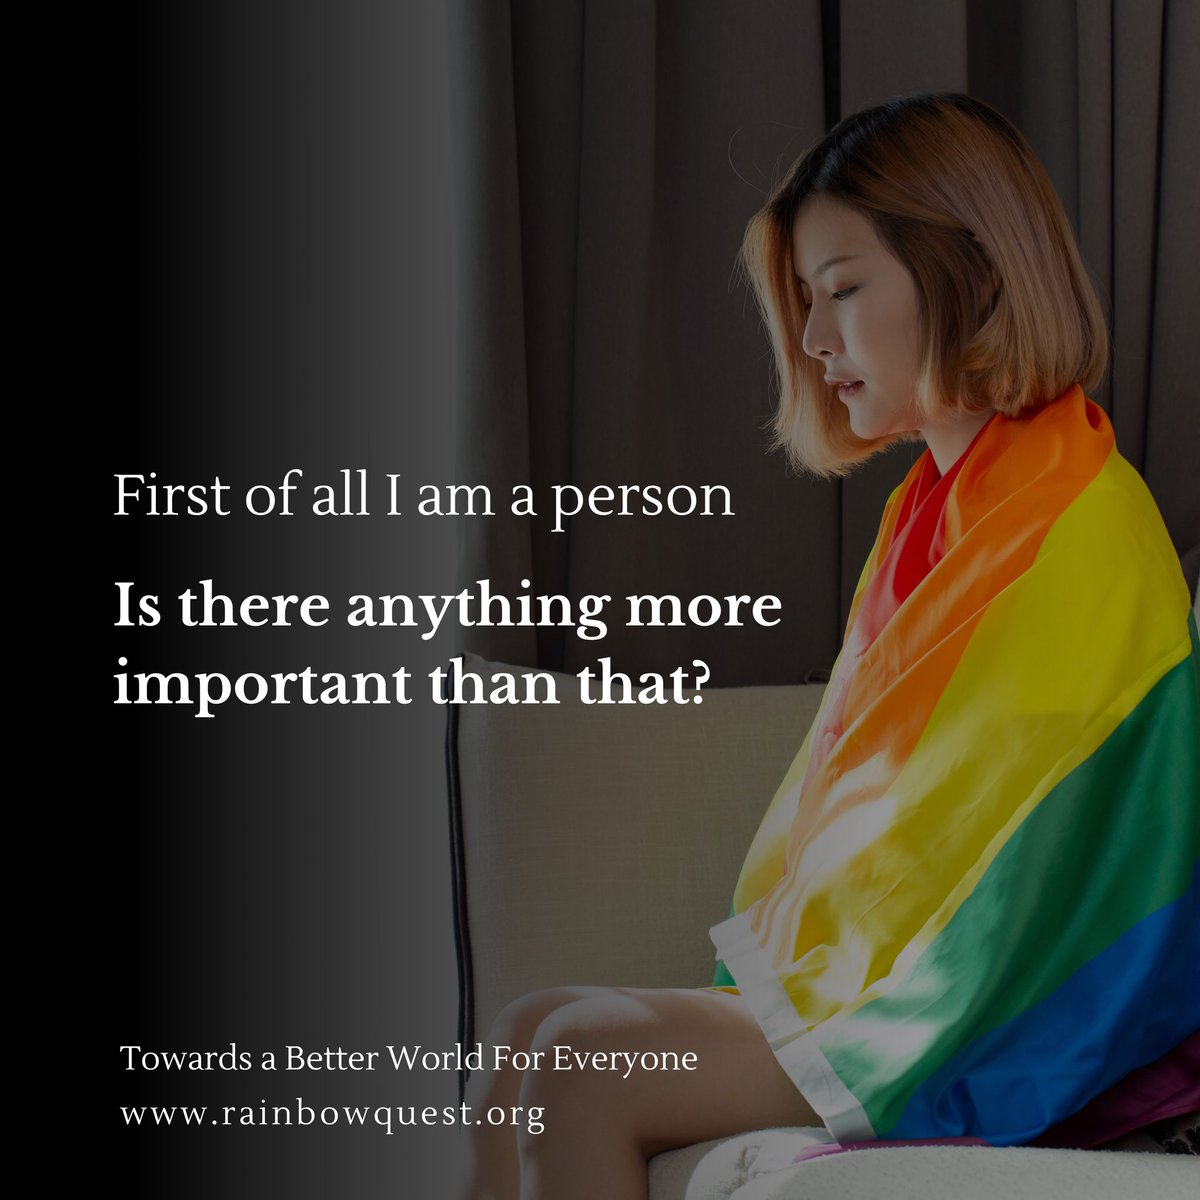 Before anything else, I am simply me. Beyond labels, beyond expectations, I am a person deserving of love, respect, and acceptance. Let's celebrate our shared humanity and embrace each other for who we are. 🏳️‍🌈 #LGBT #Pride #HumanityFirst